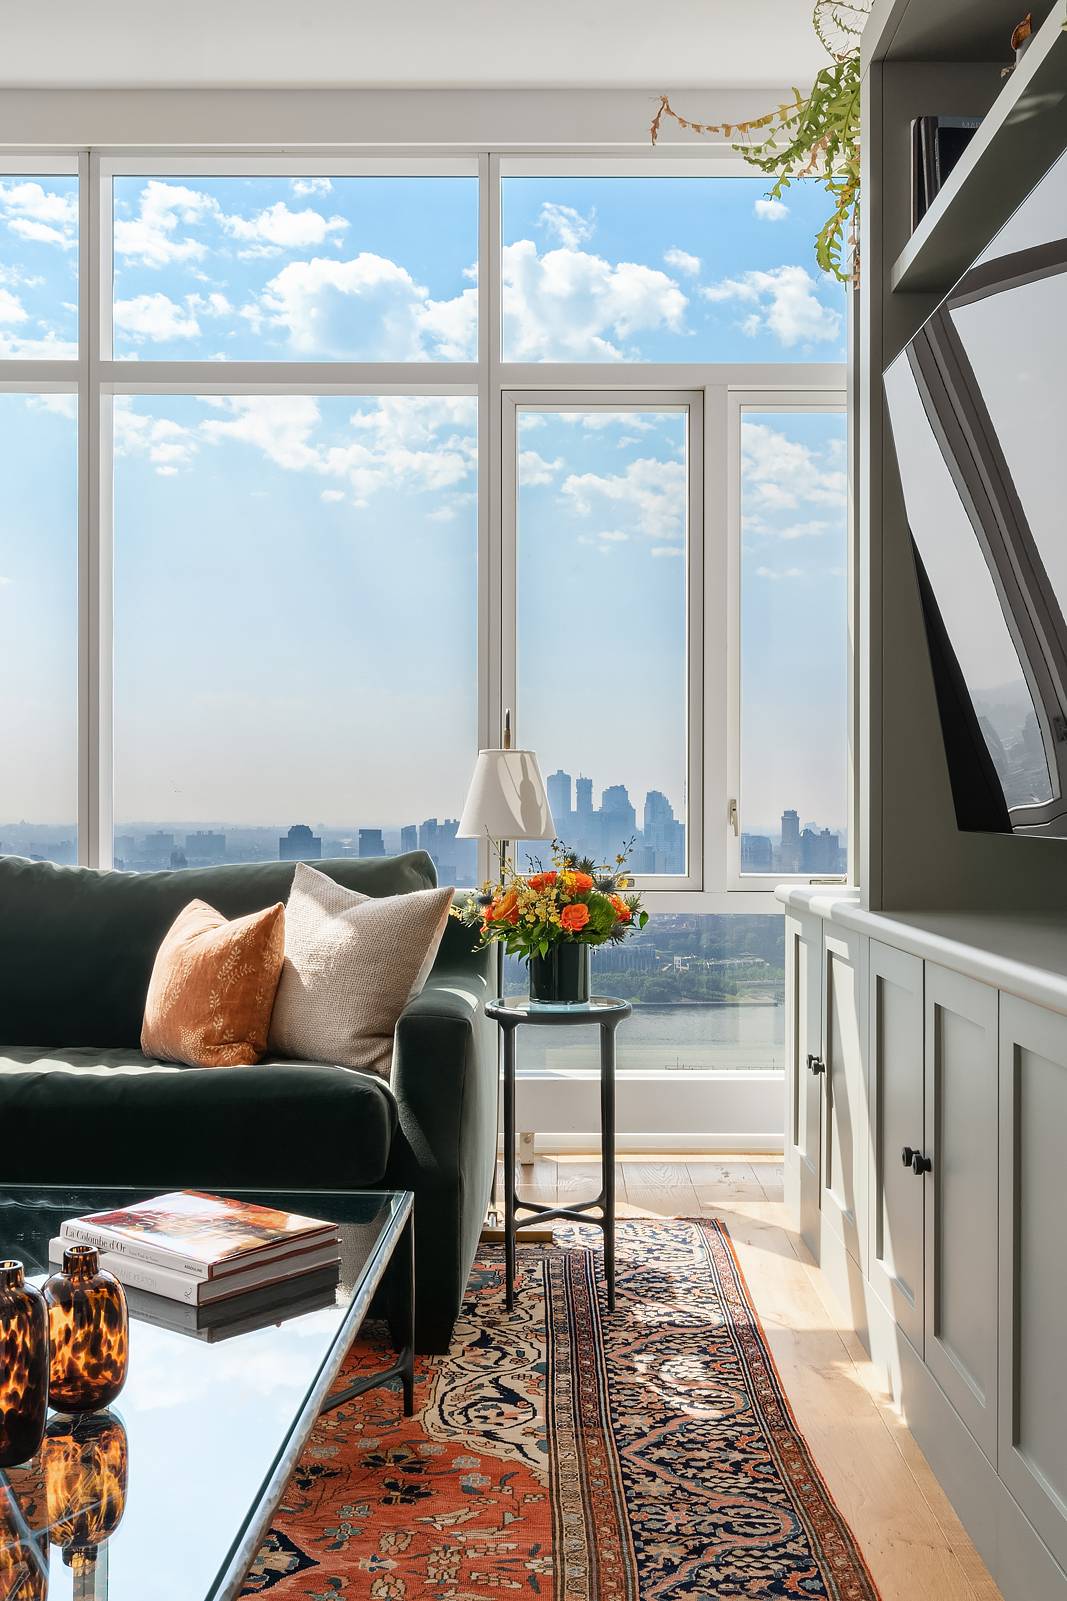 Unparalleled New York City views from high above in this exquisitely realized two bedroom, two and a half bathroom home.